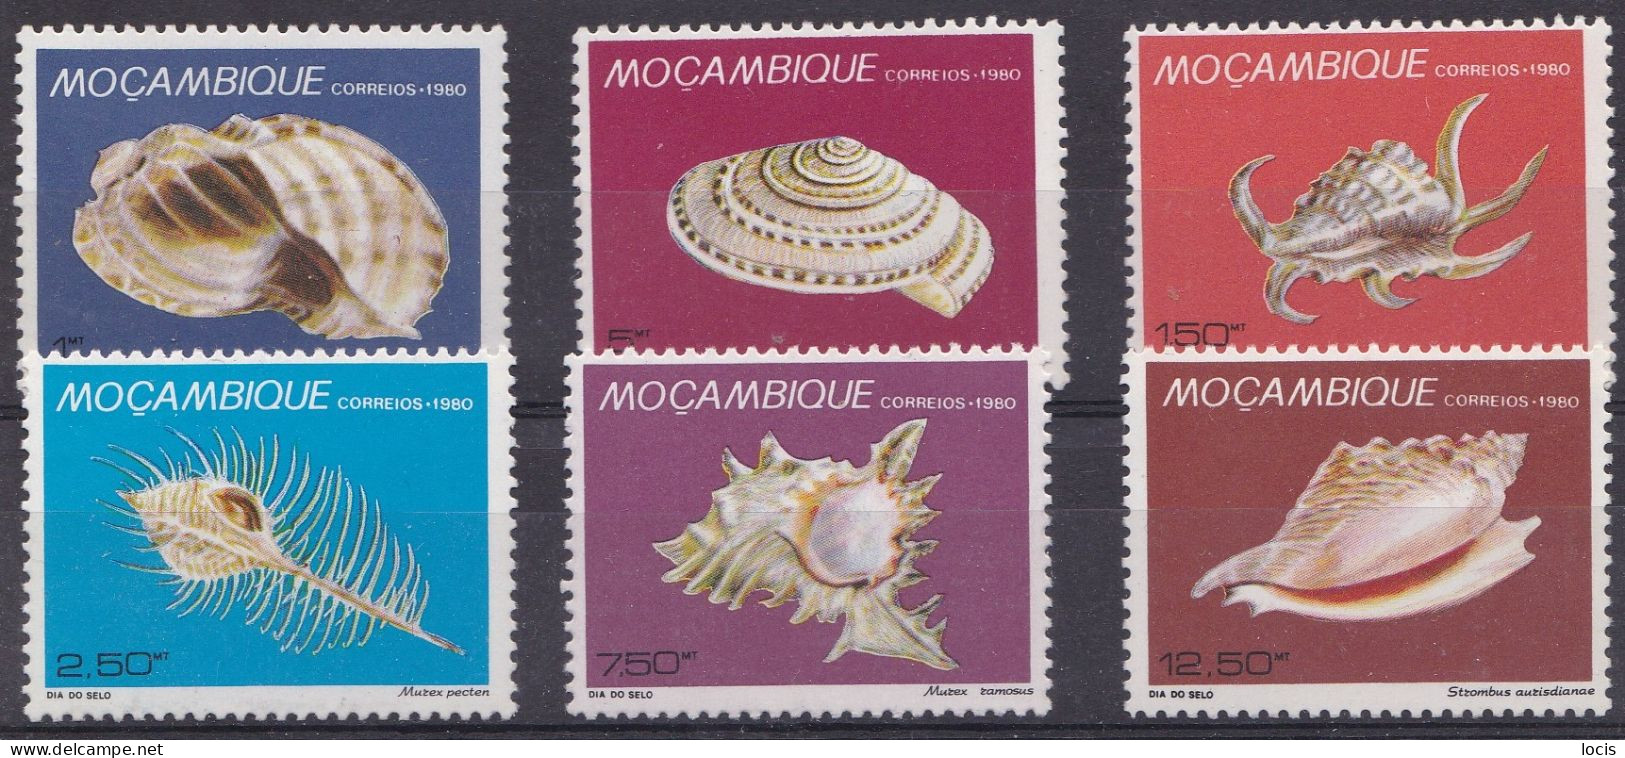 MOCAMBIQUE 1980 MNH** - Coquillages